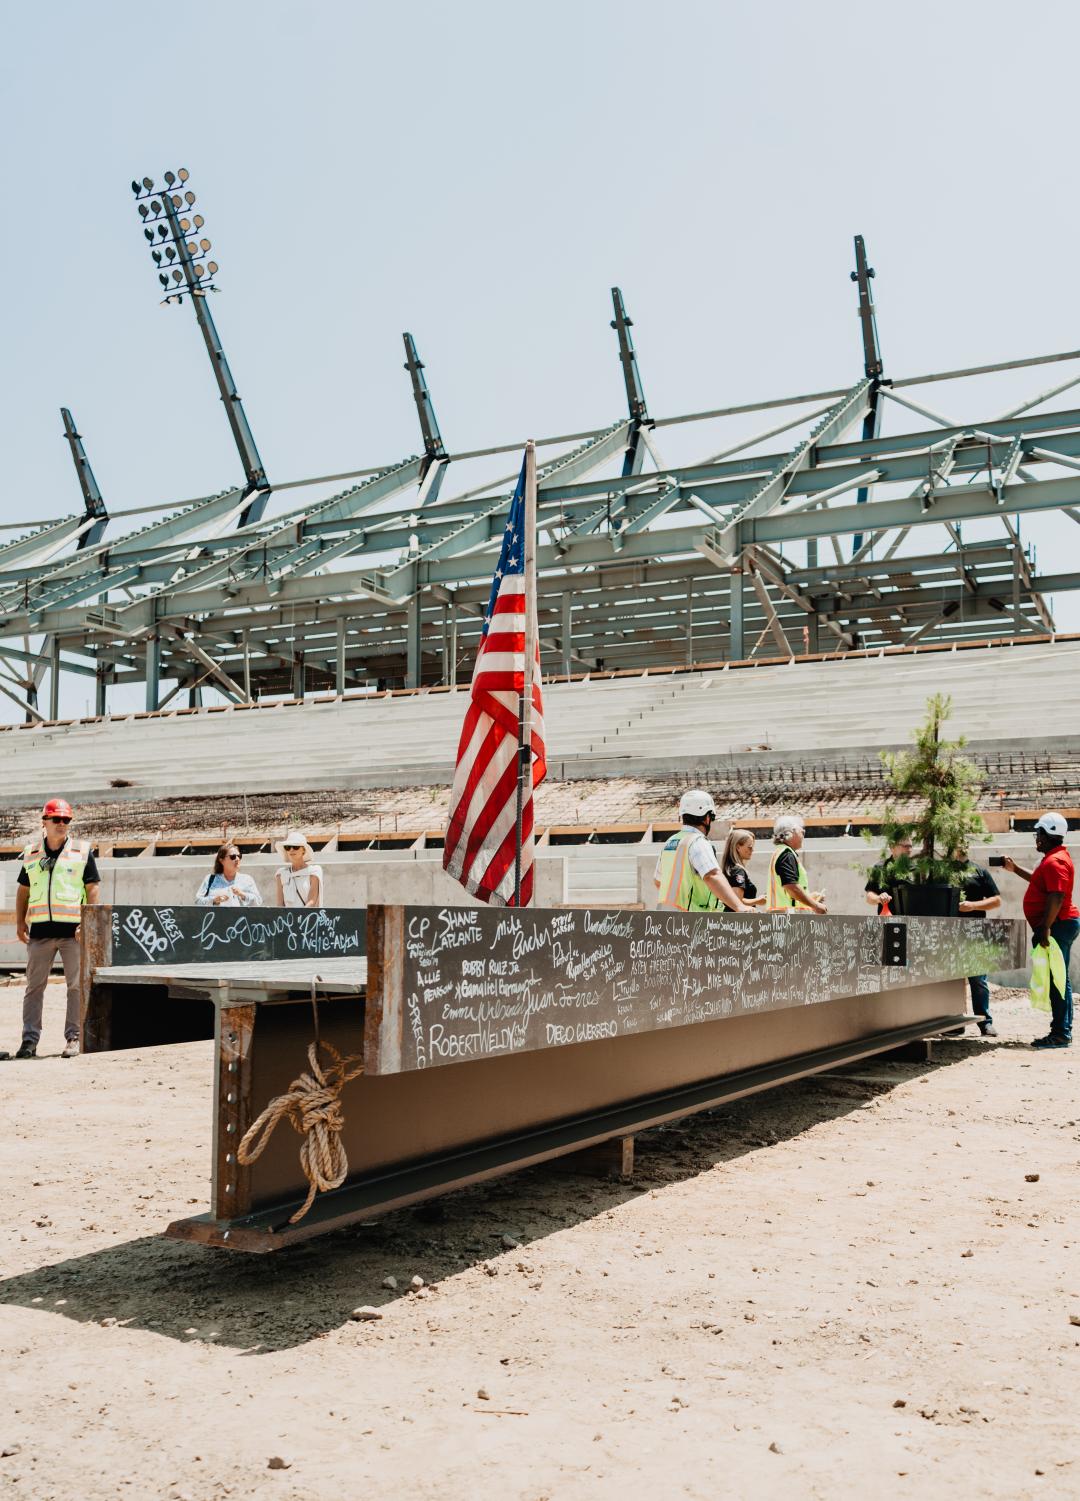 One of the 2,500 steel beams that makes up the stadium structure.